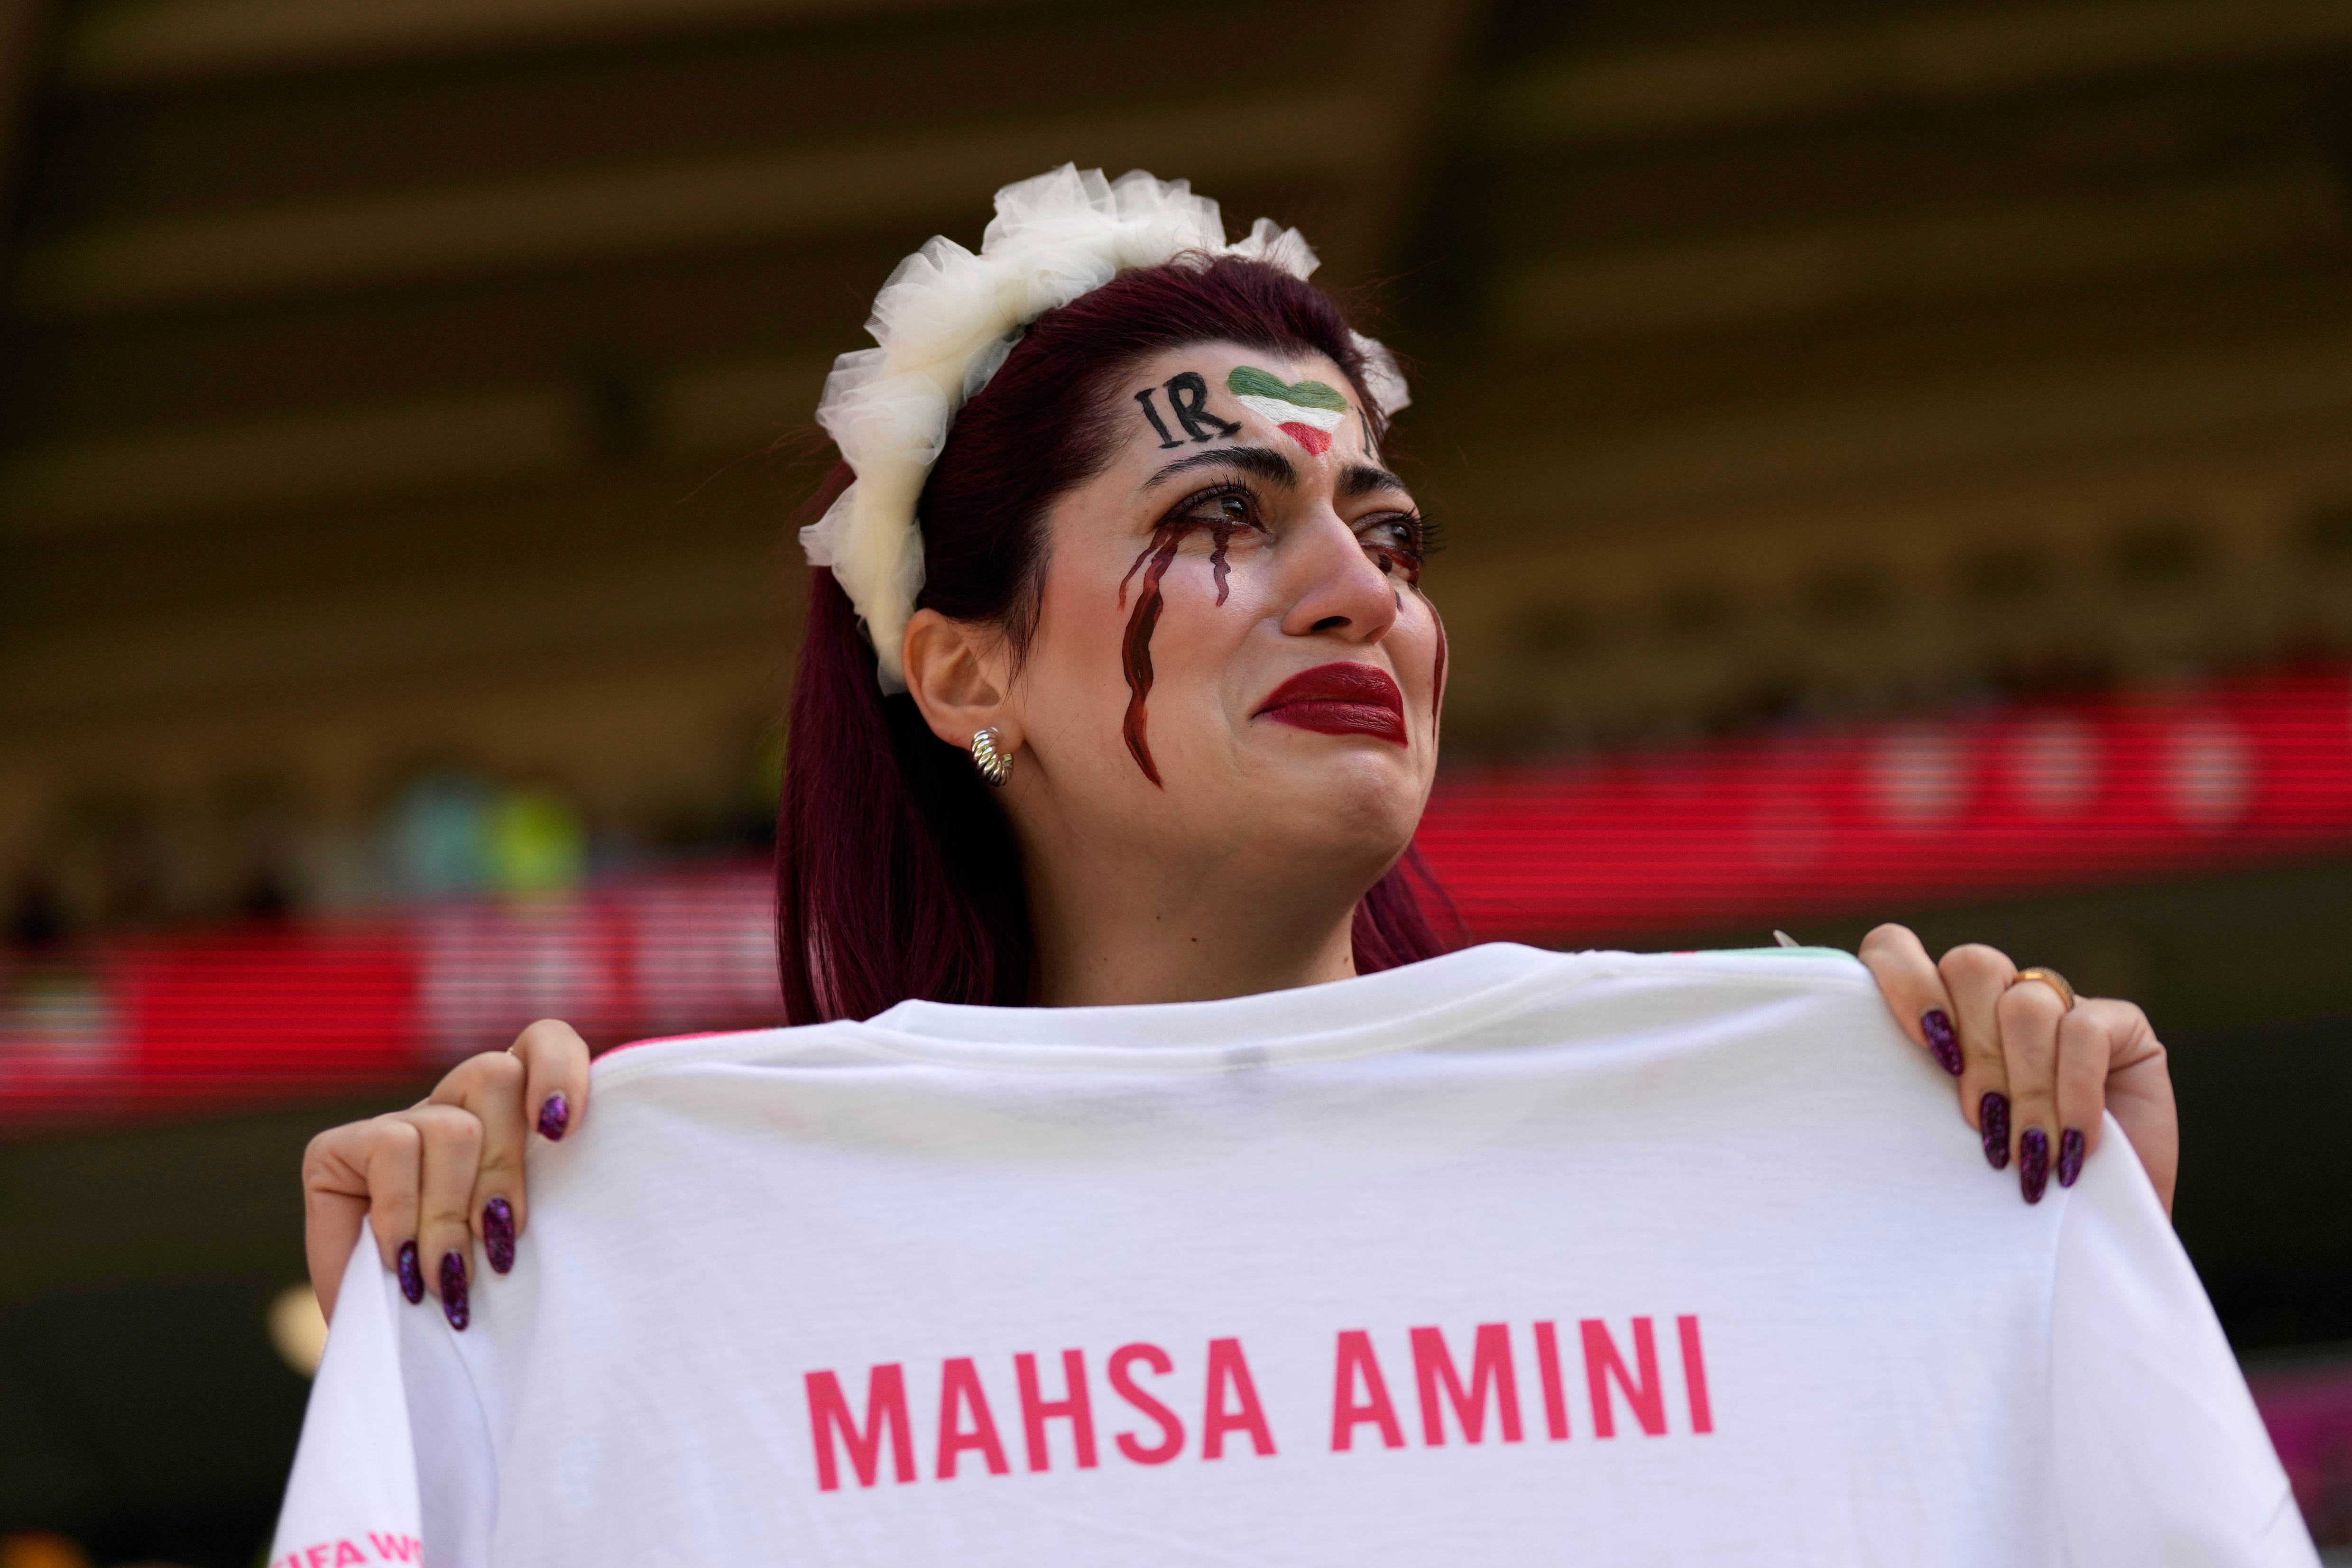 An Iran team supporter cries as she holds a shirt that reads ‘Mahsa Amini’ before Iran’s victory over Wales